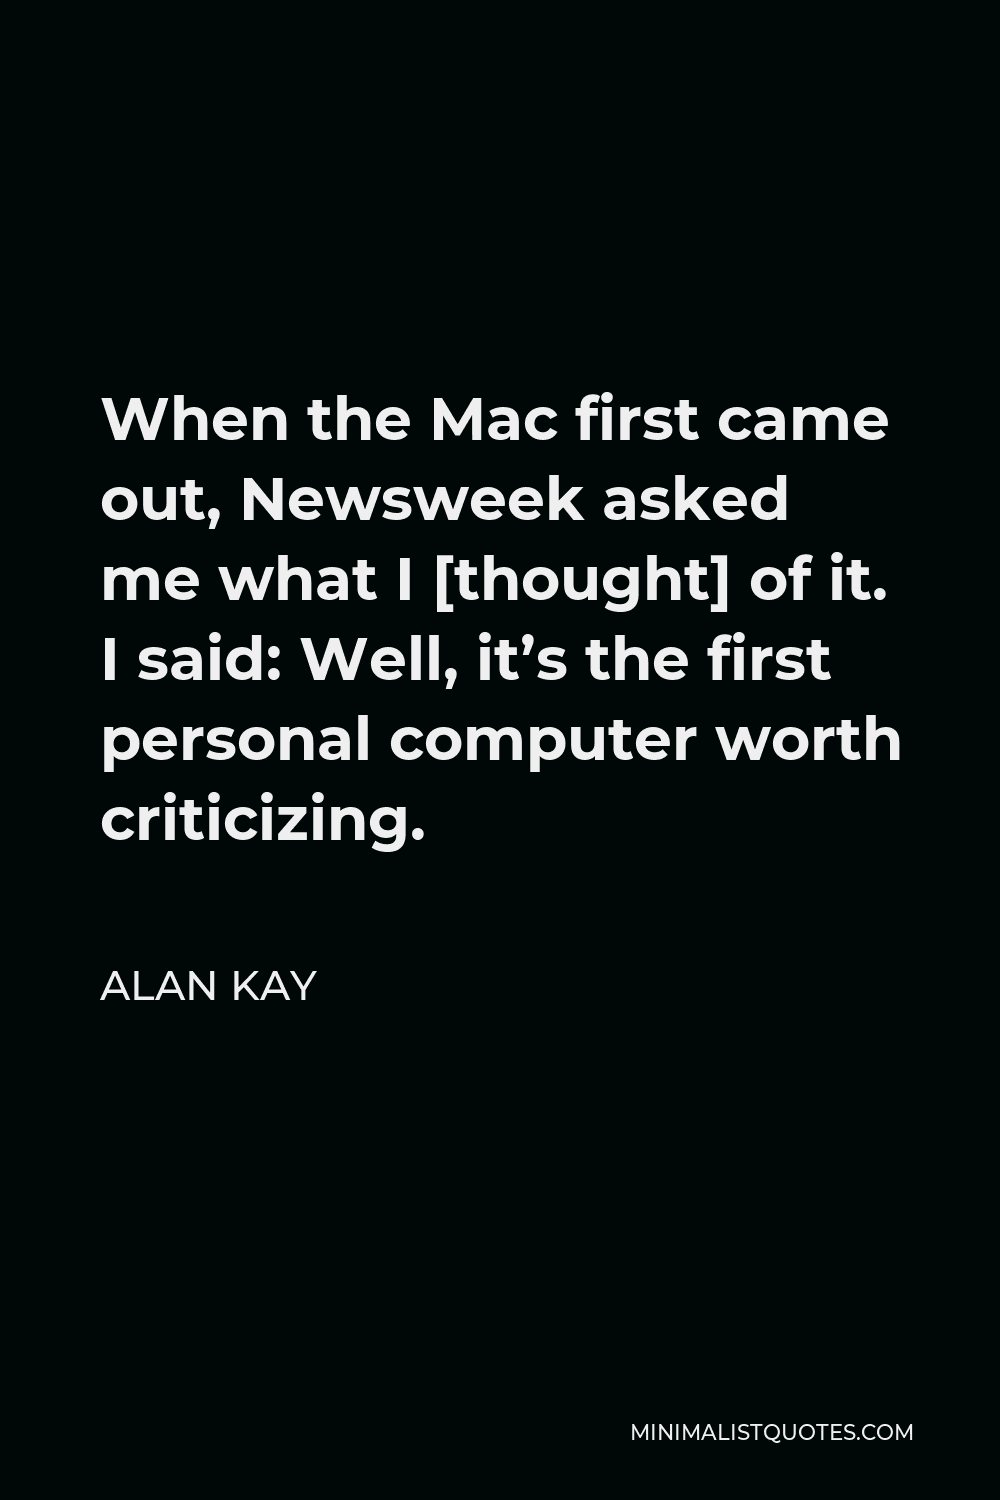 Alan Kay Quote - When the Mac first came out, Newsweek asked me what I [thought] of it. I said: Well, it’s the first personal computer worth criticizing.